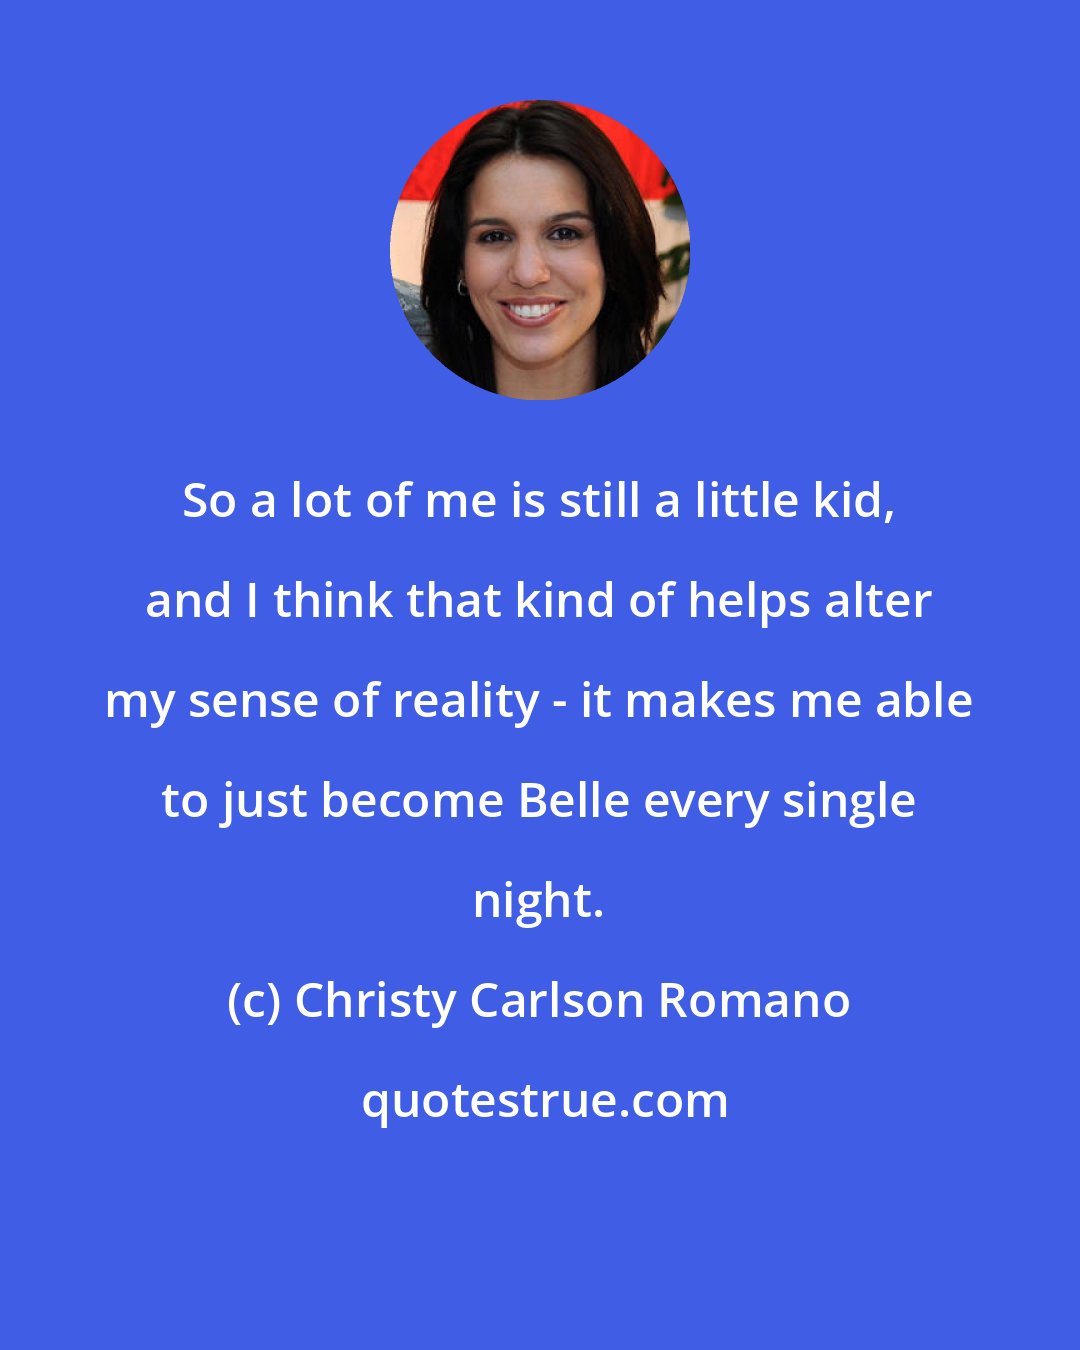 Christy Carlson Romano: So a lot of me is still a little kid, and I think that kind of helps alter my sense of reality - it makes me able to just become Belle every single night.